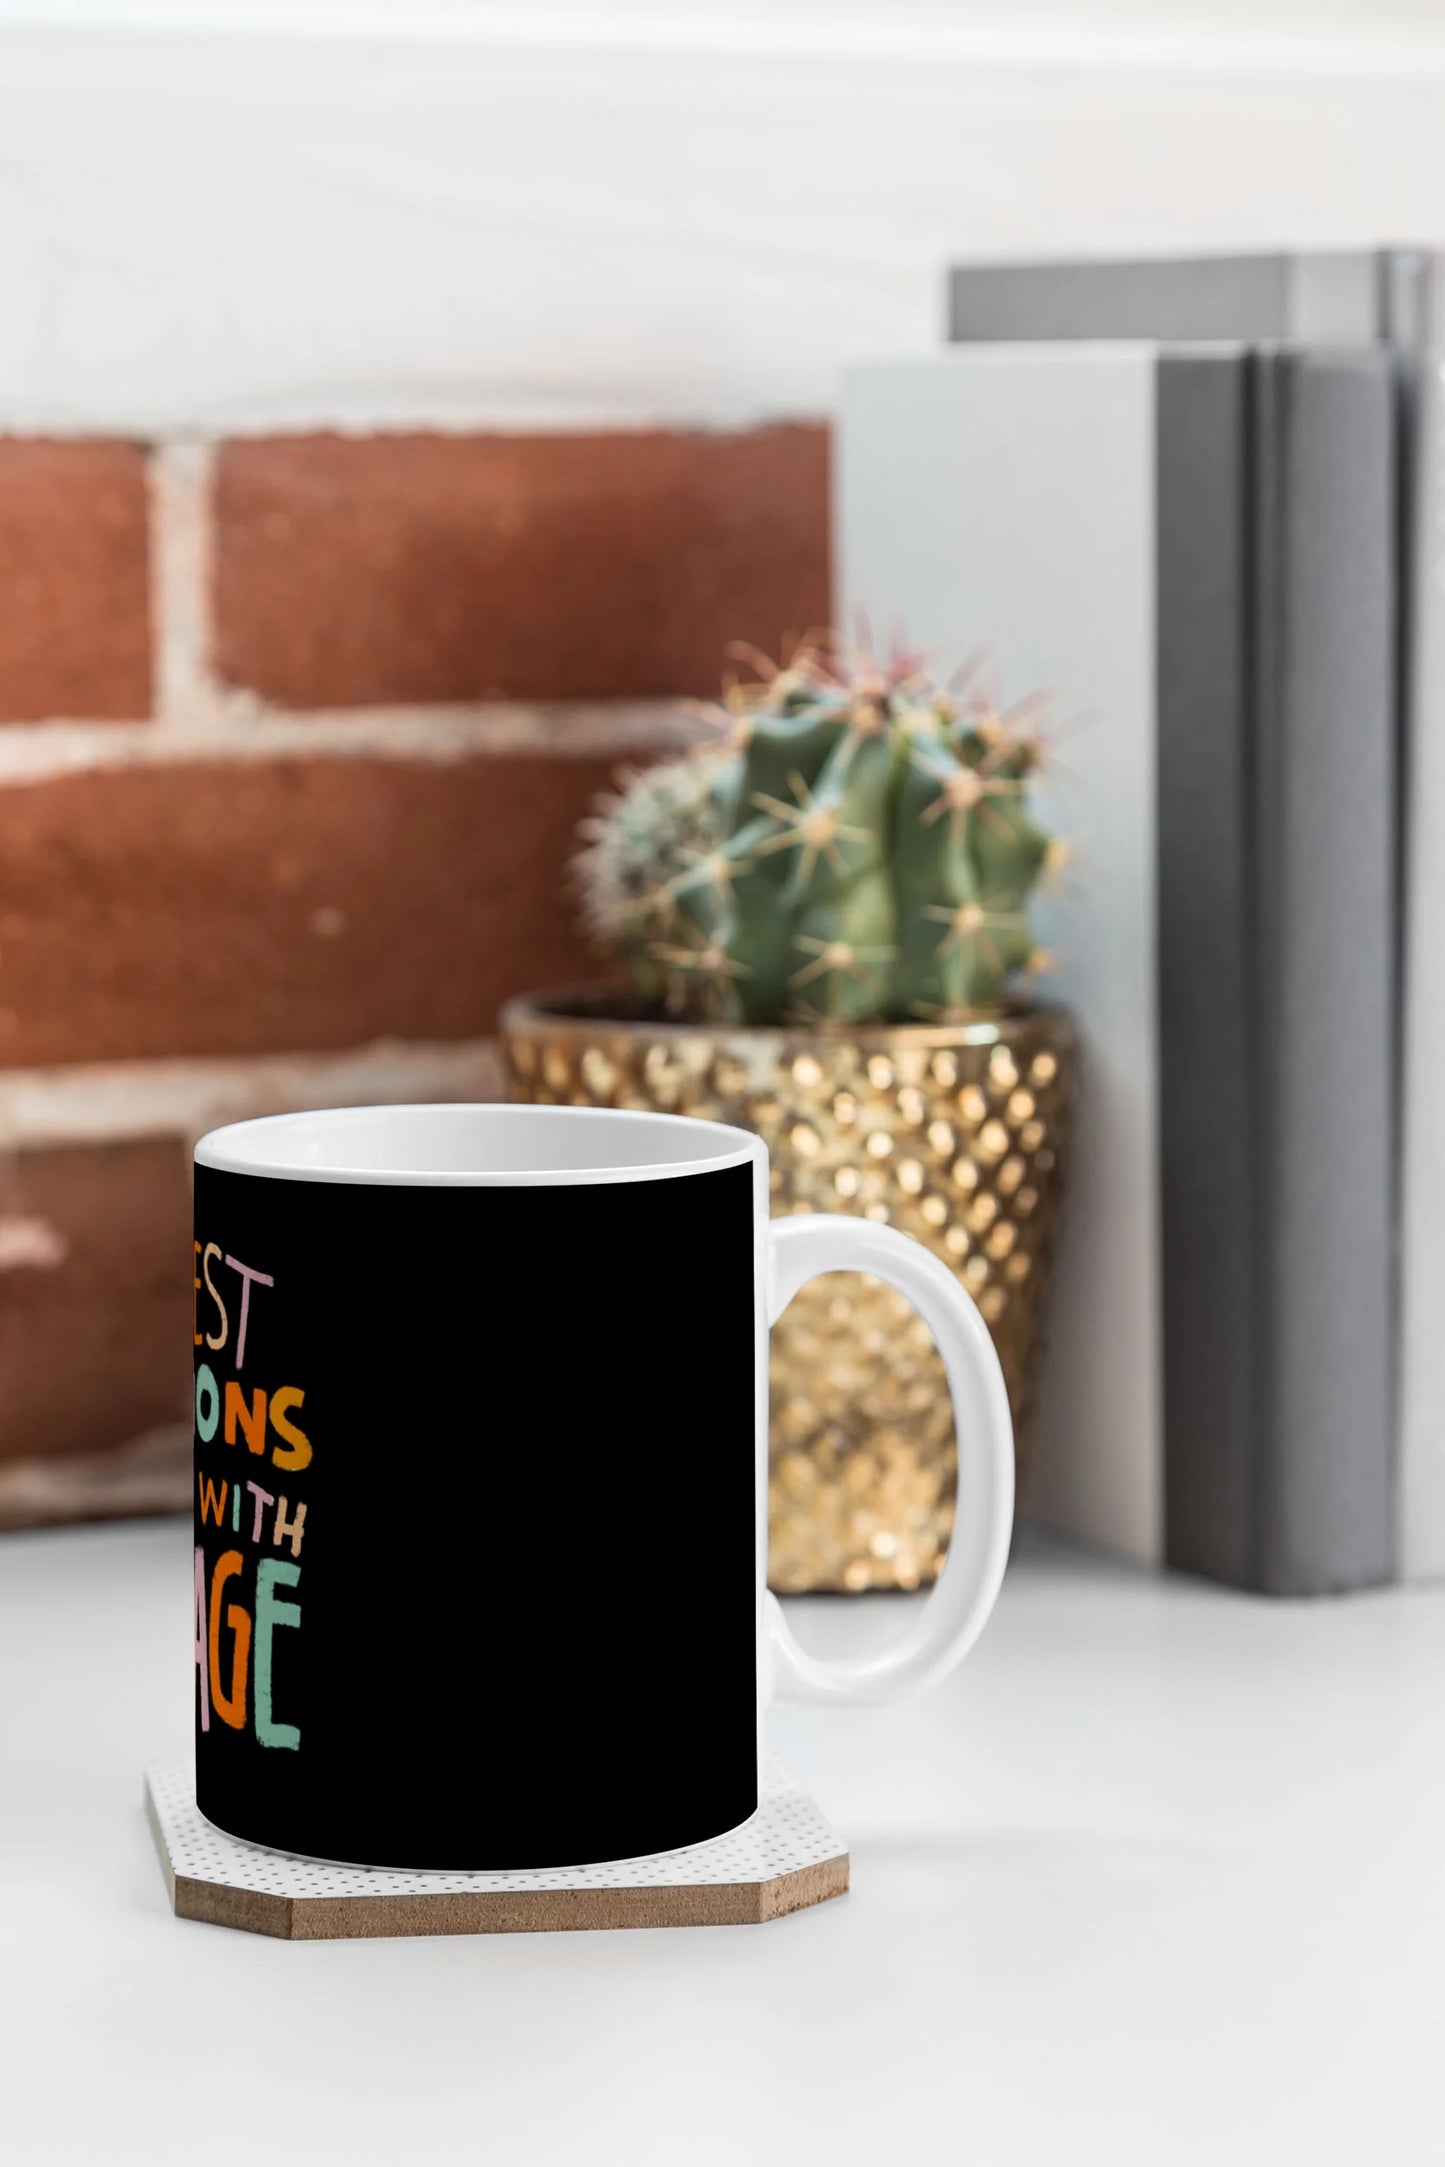 THE BEST DECISIONS START WITH COURAGE COFFEE MUG